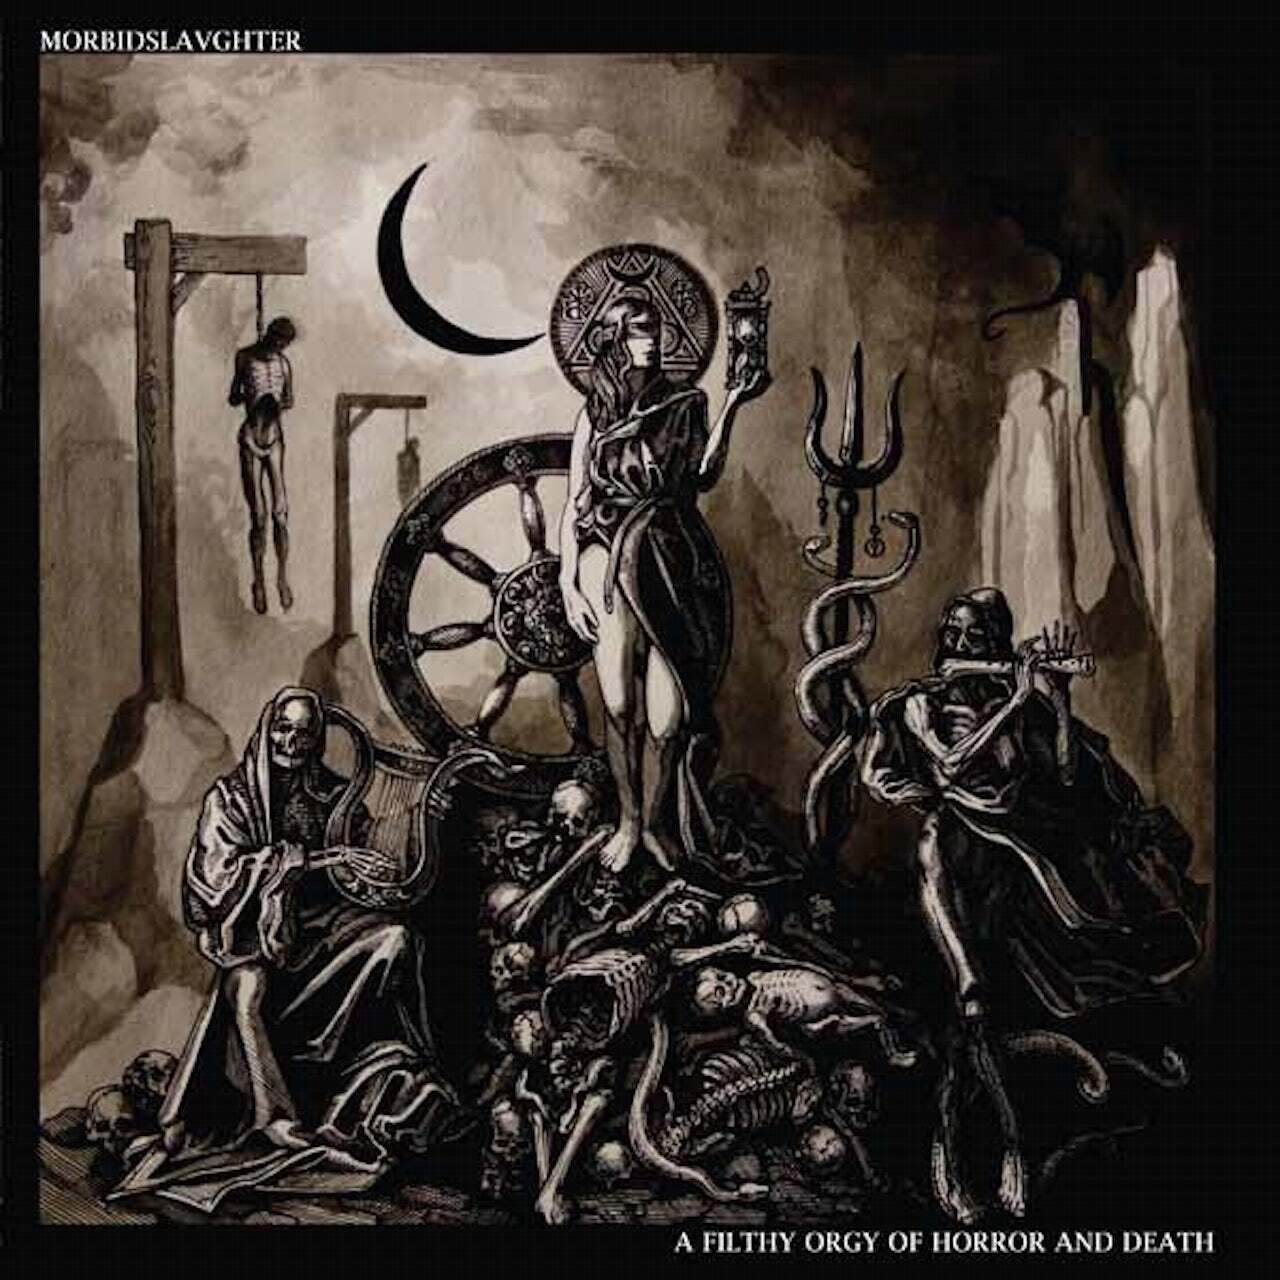 Morbid Slaughter / A Filthy Orgy of Horror and Death